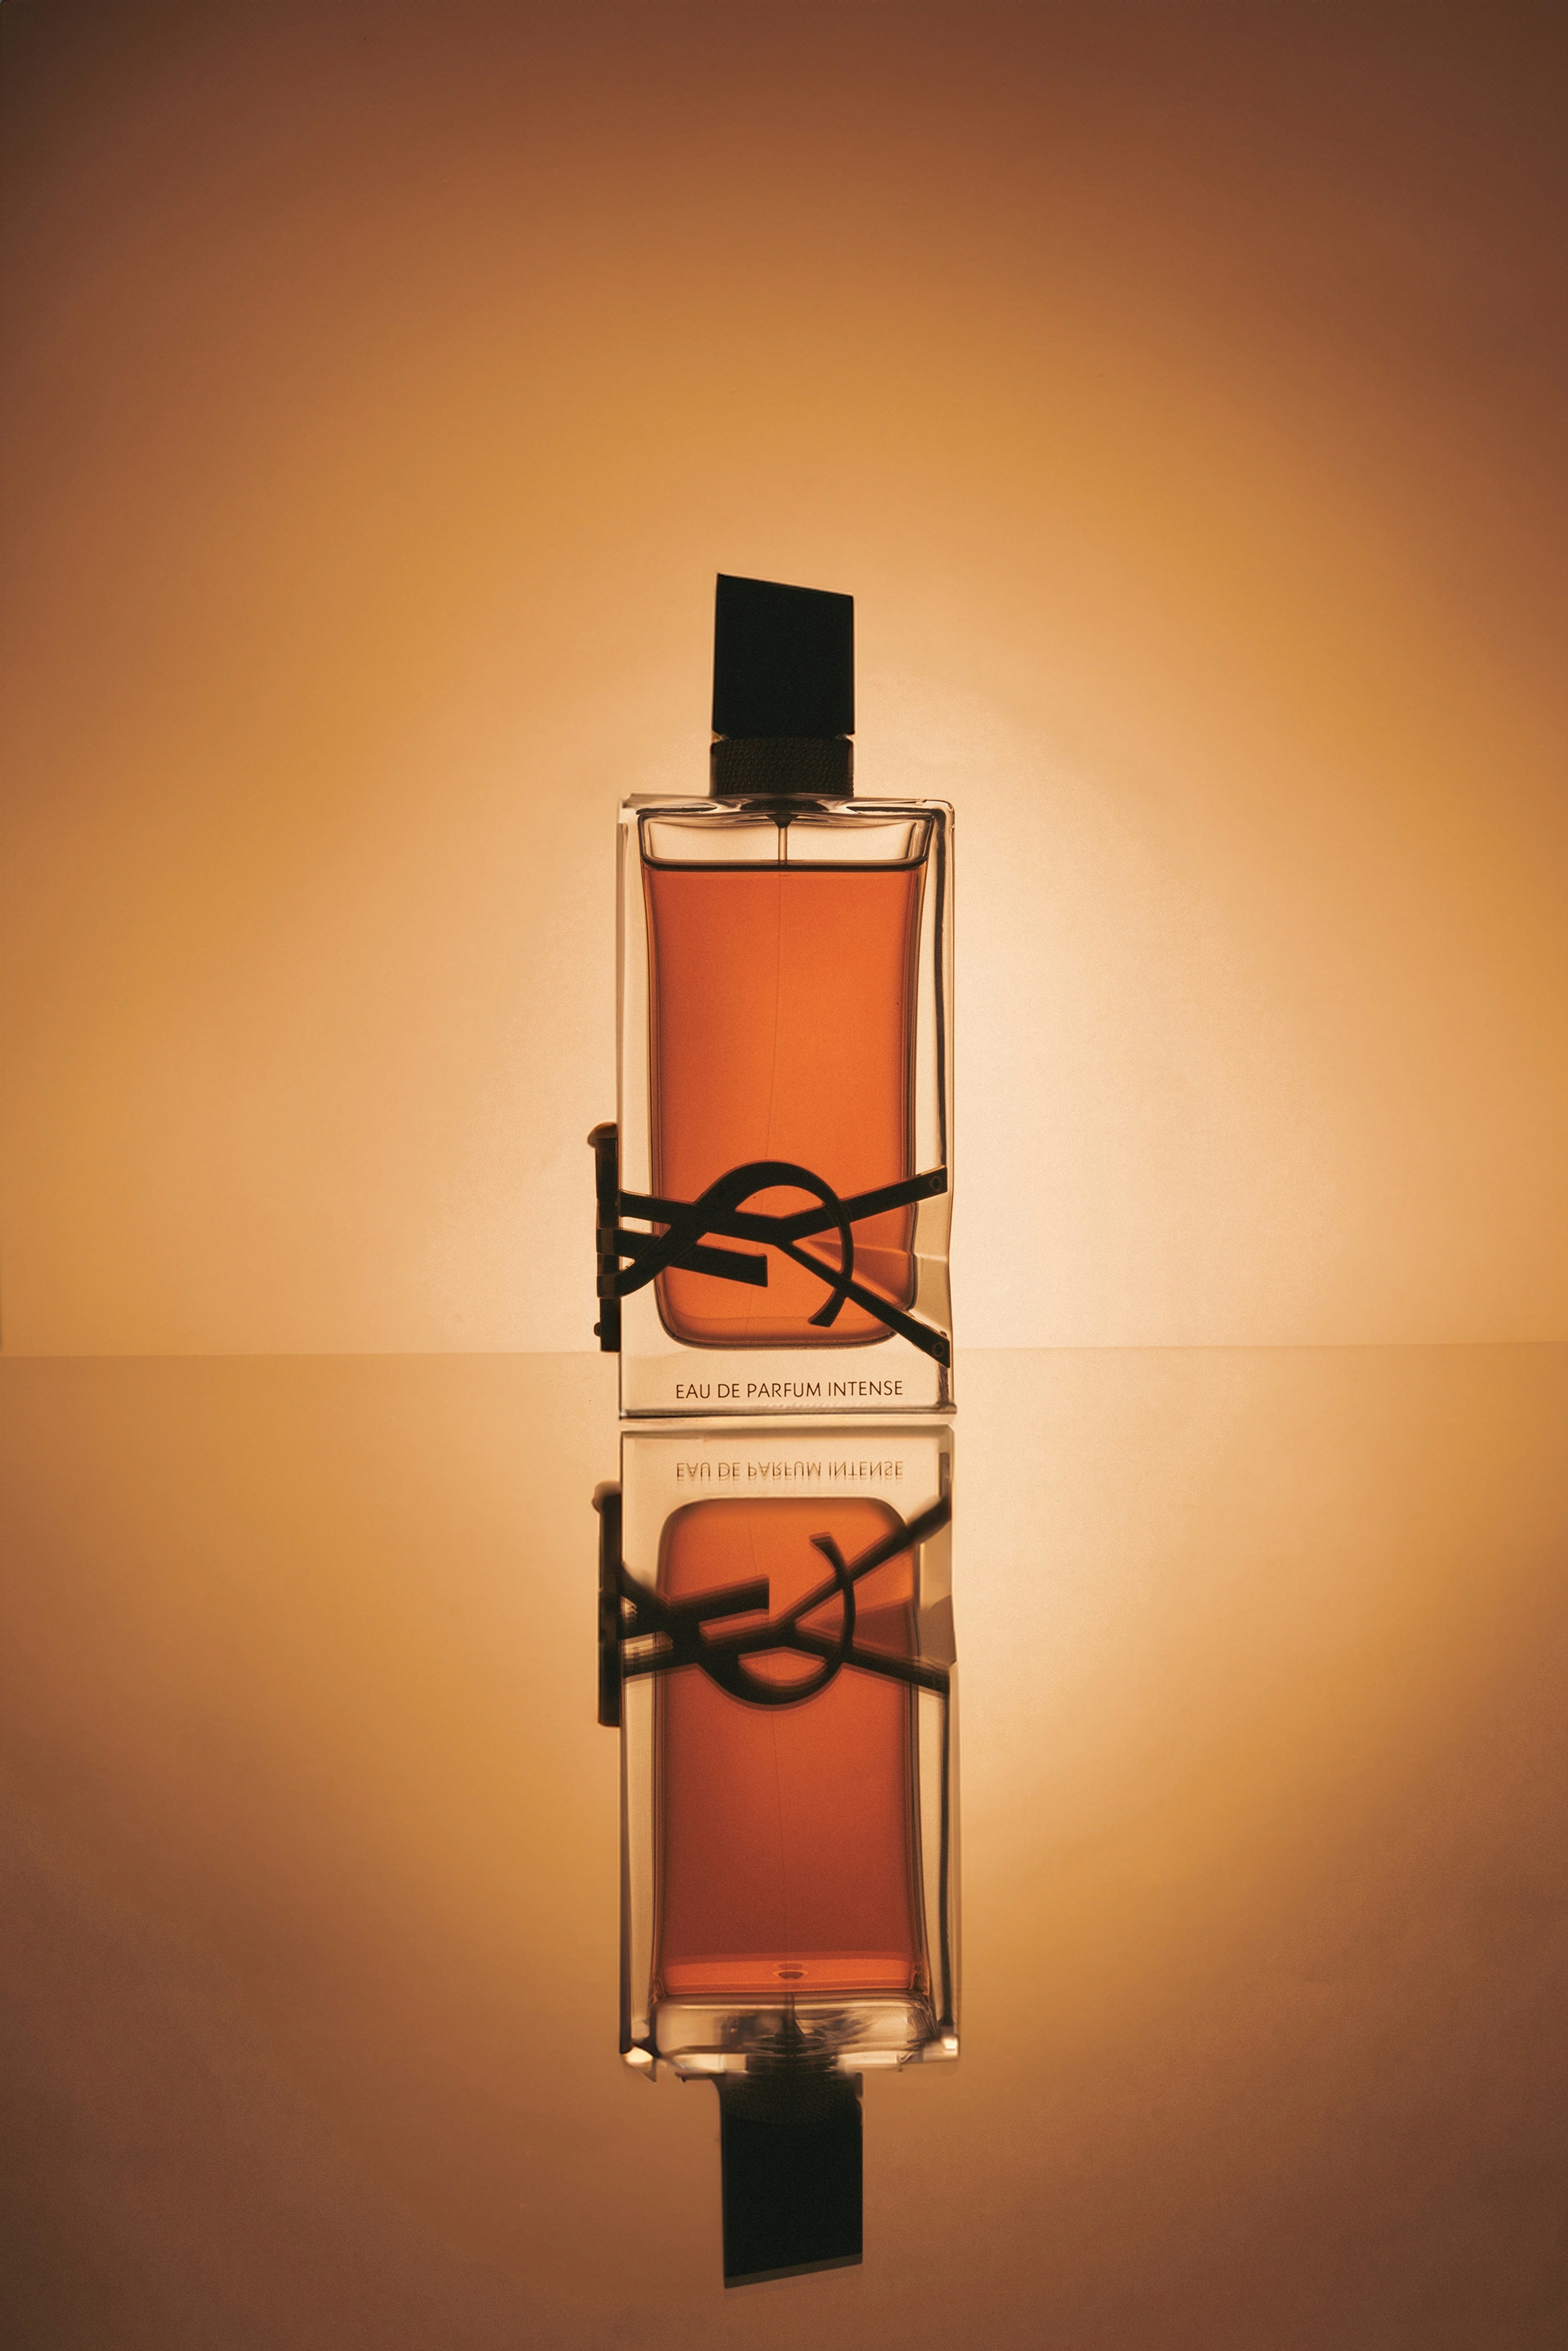 A bottle of cologne on a table with reflective surfaces that cause the reflection effect